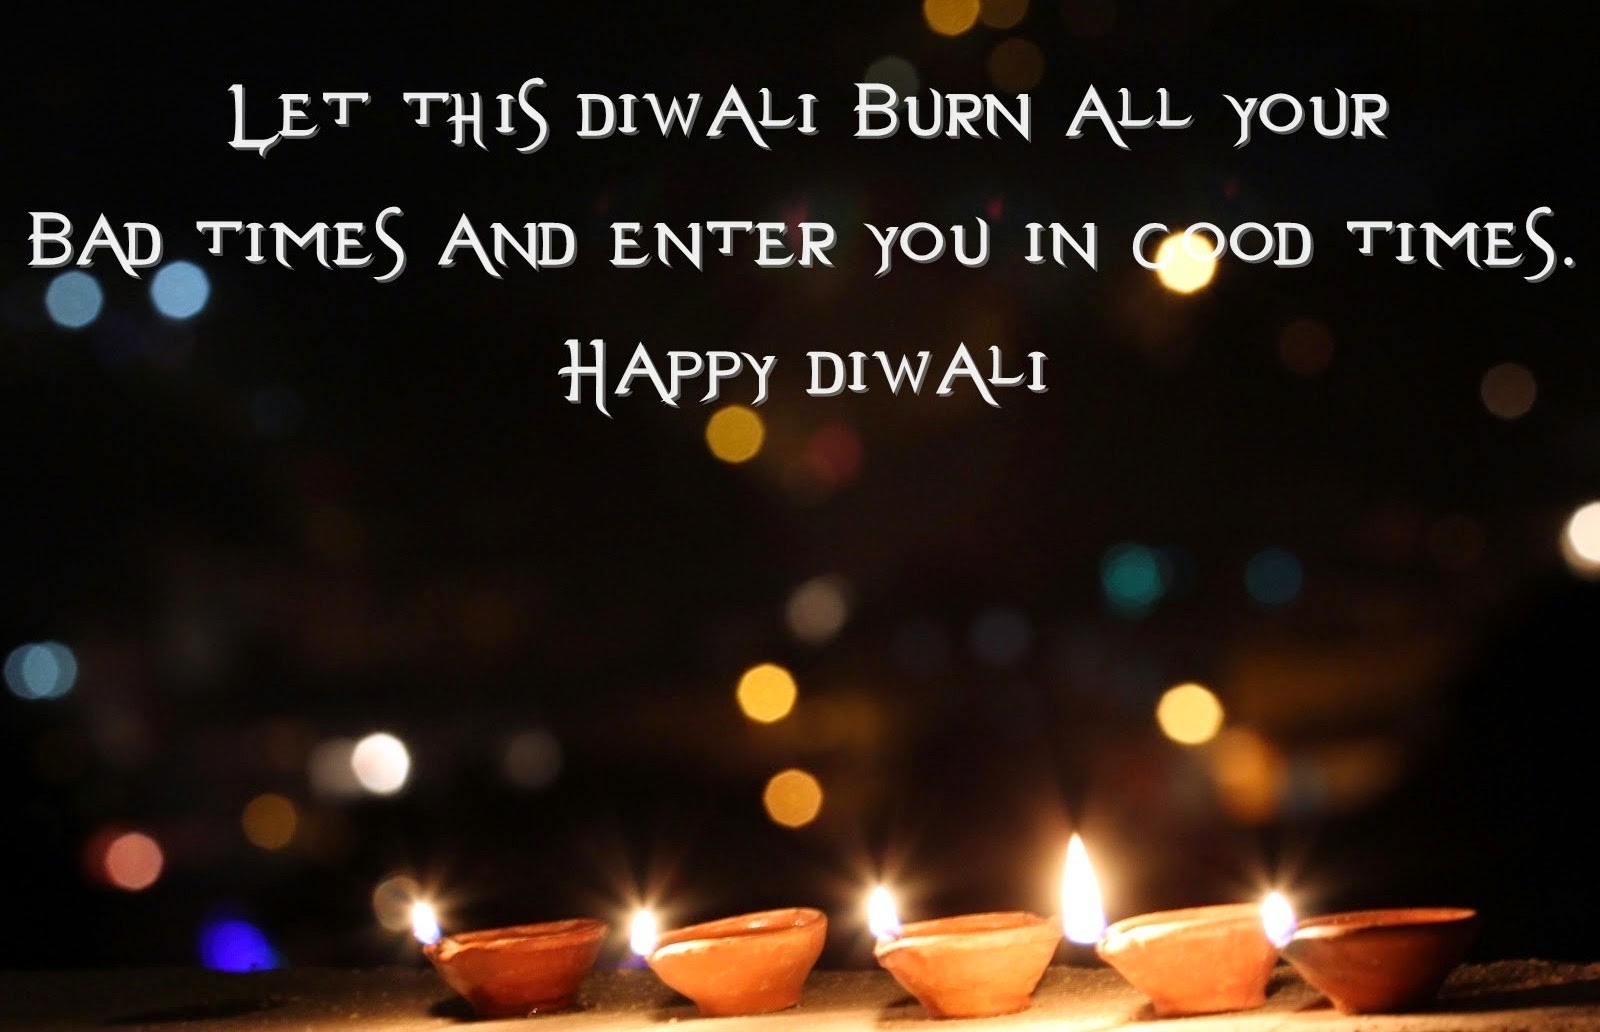 let this Diwali burn all your bad times and enter you in good times. happy Diwali